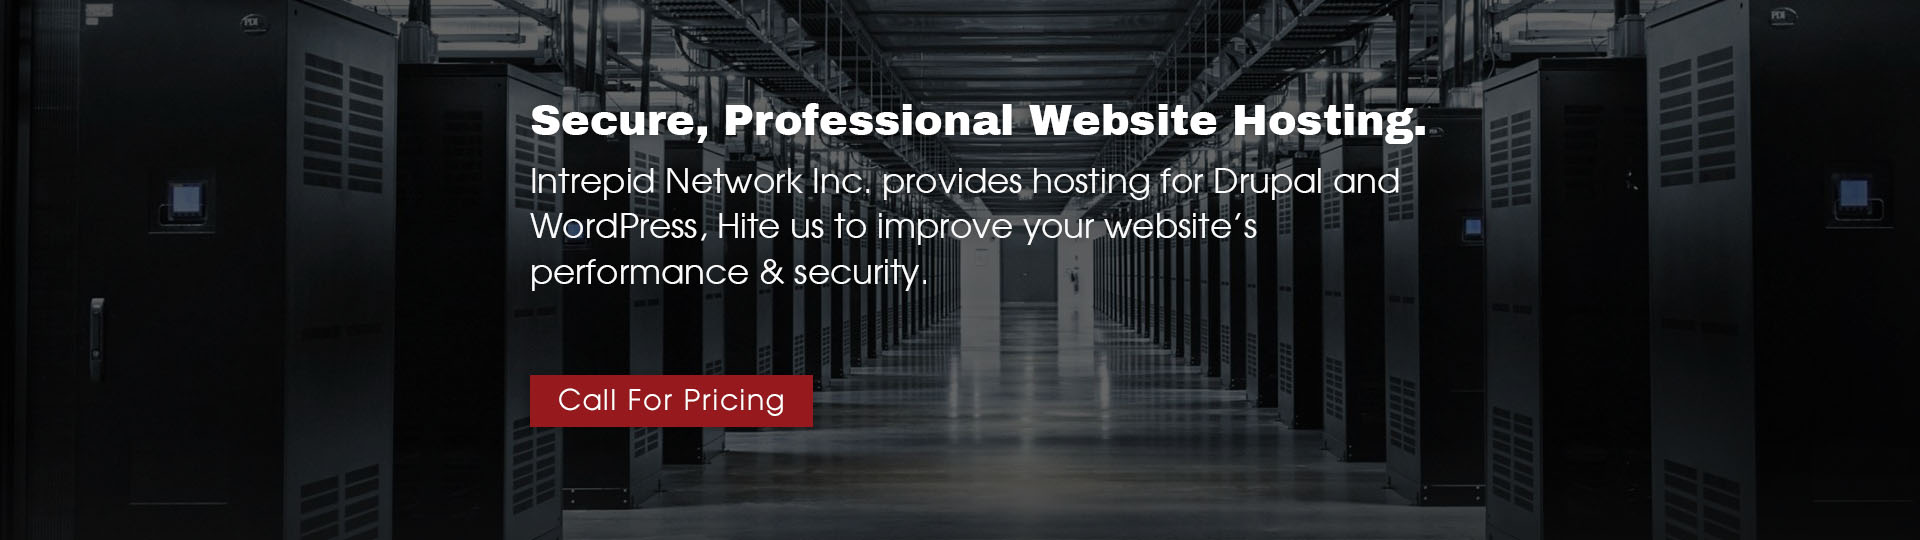 Secure Professional Website Hosting with Intrepid Network